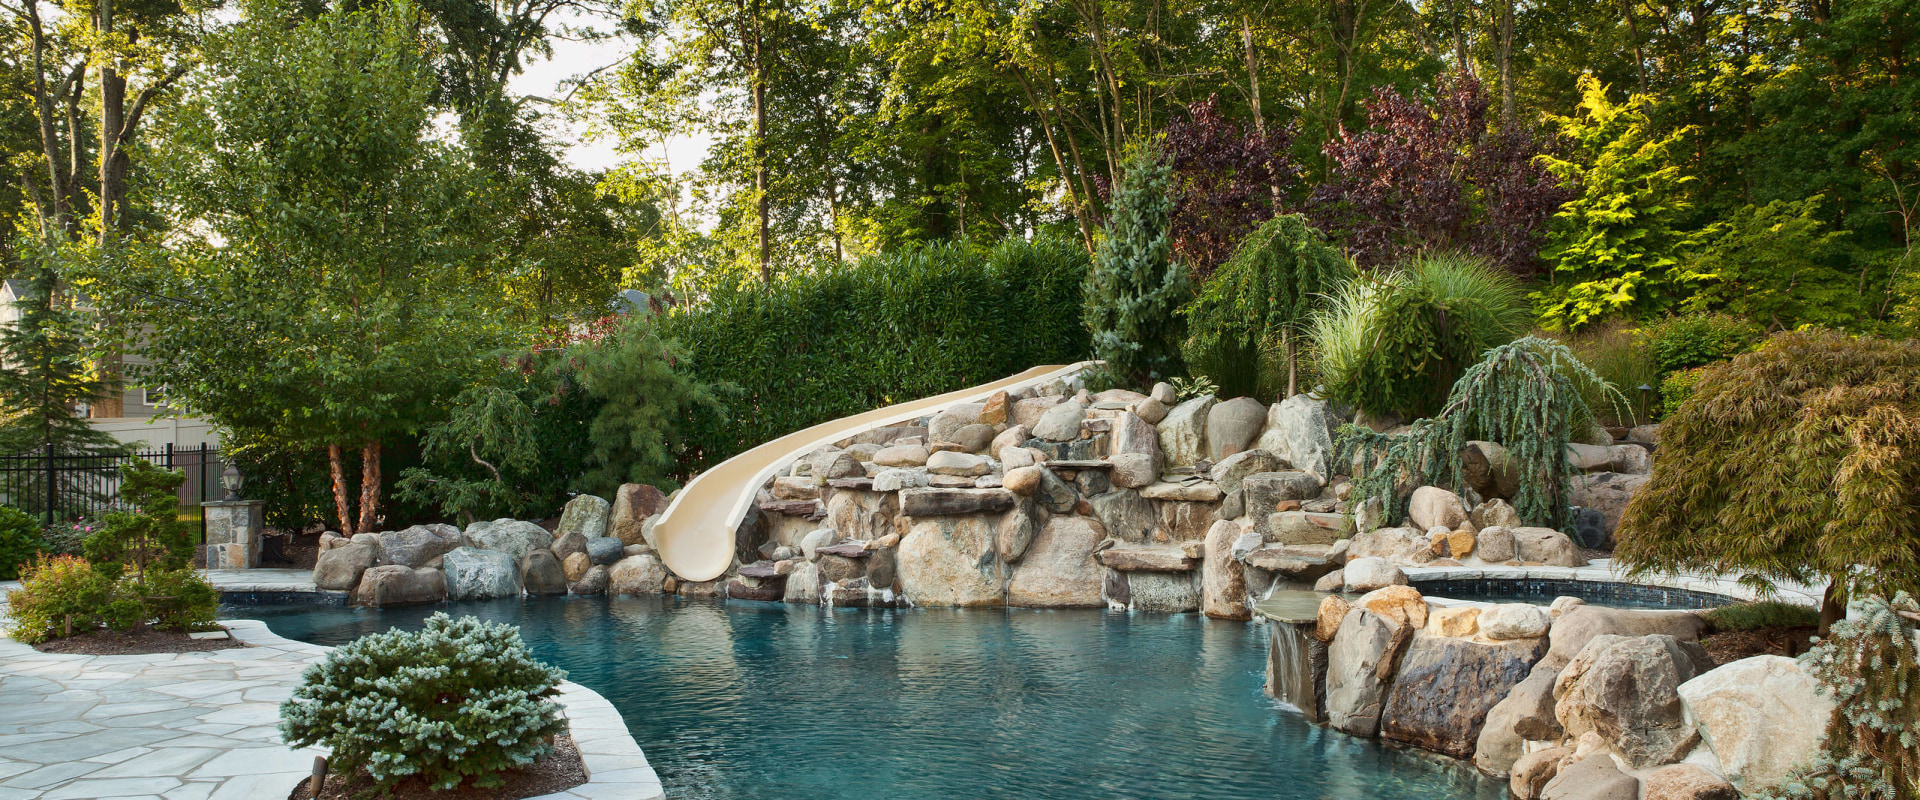 Creating A Backyard Oasis: How Pool Installation And Home Remodeling Can Enhance Your Livingston, NJ Property